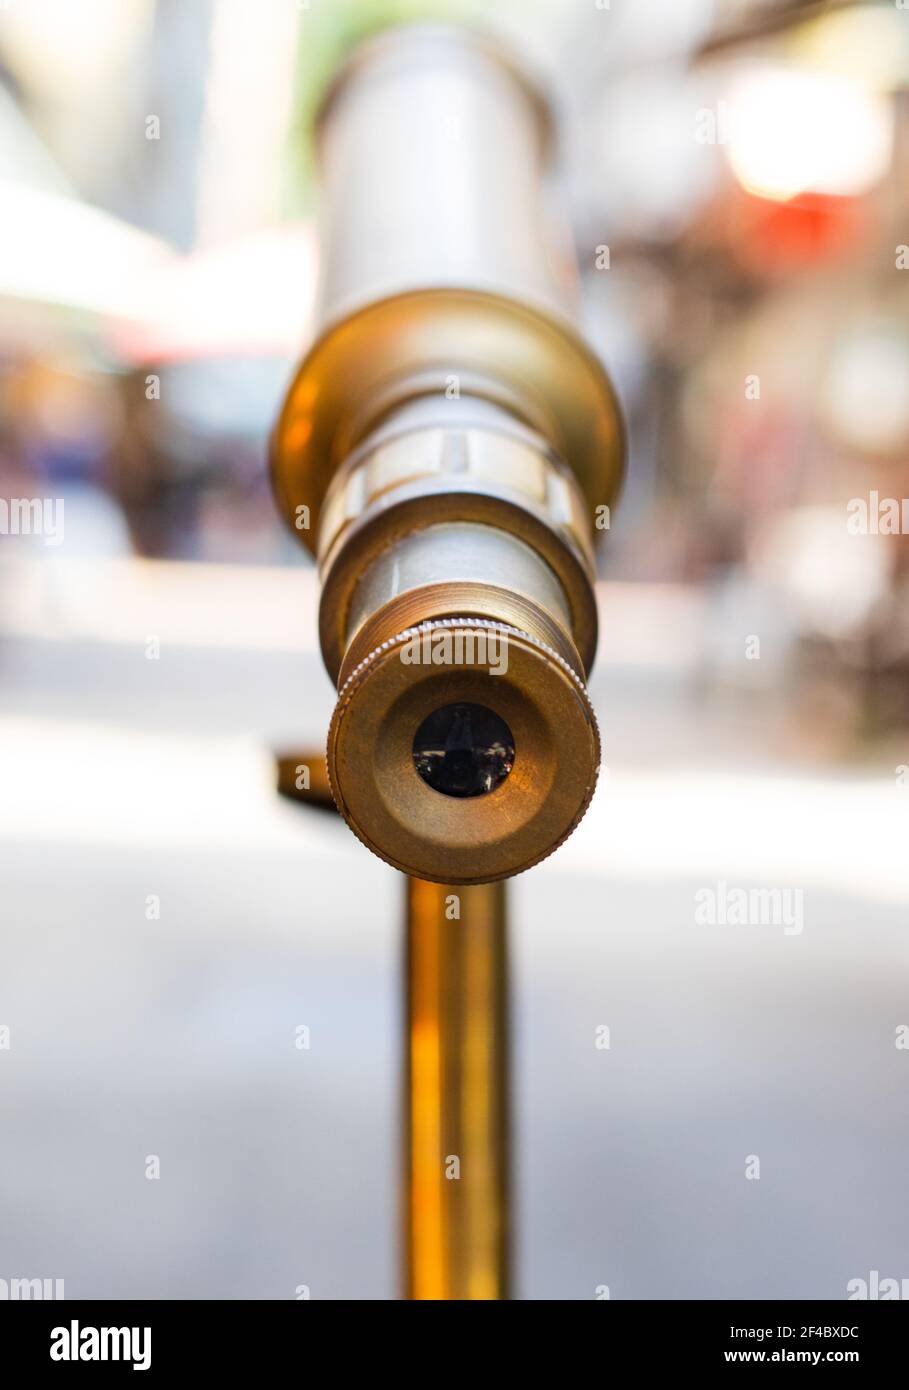 Telescope in a street in Hong Kong where vendors sell antiques, bric-a-brac and curios Stock Photo